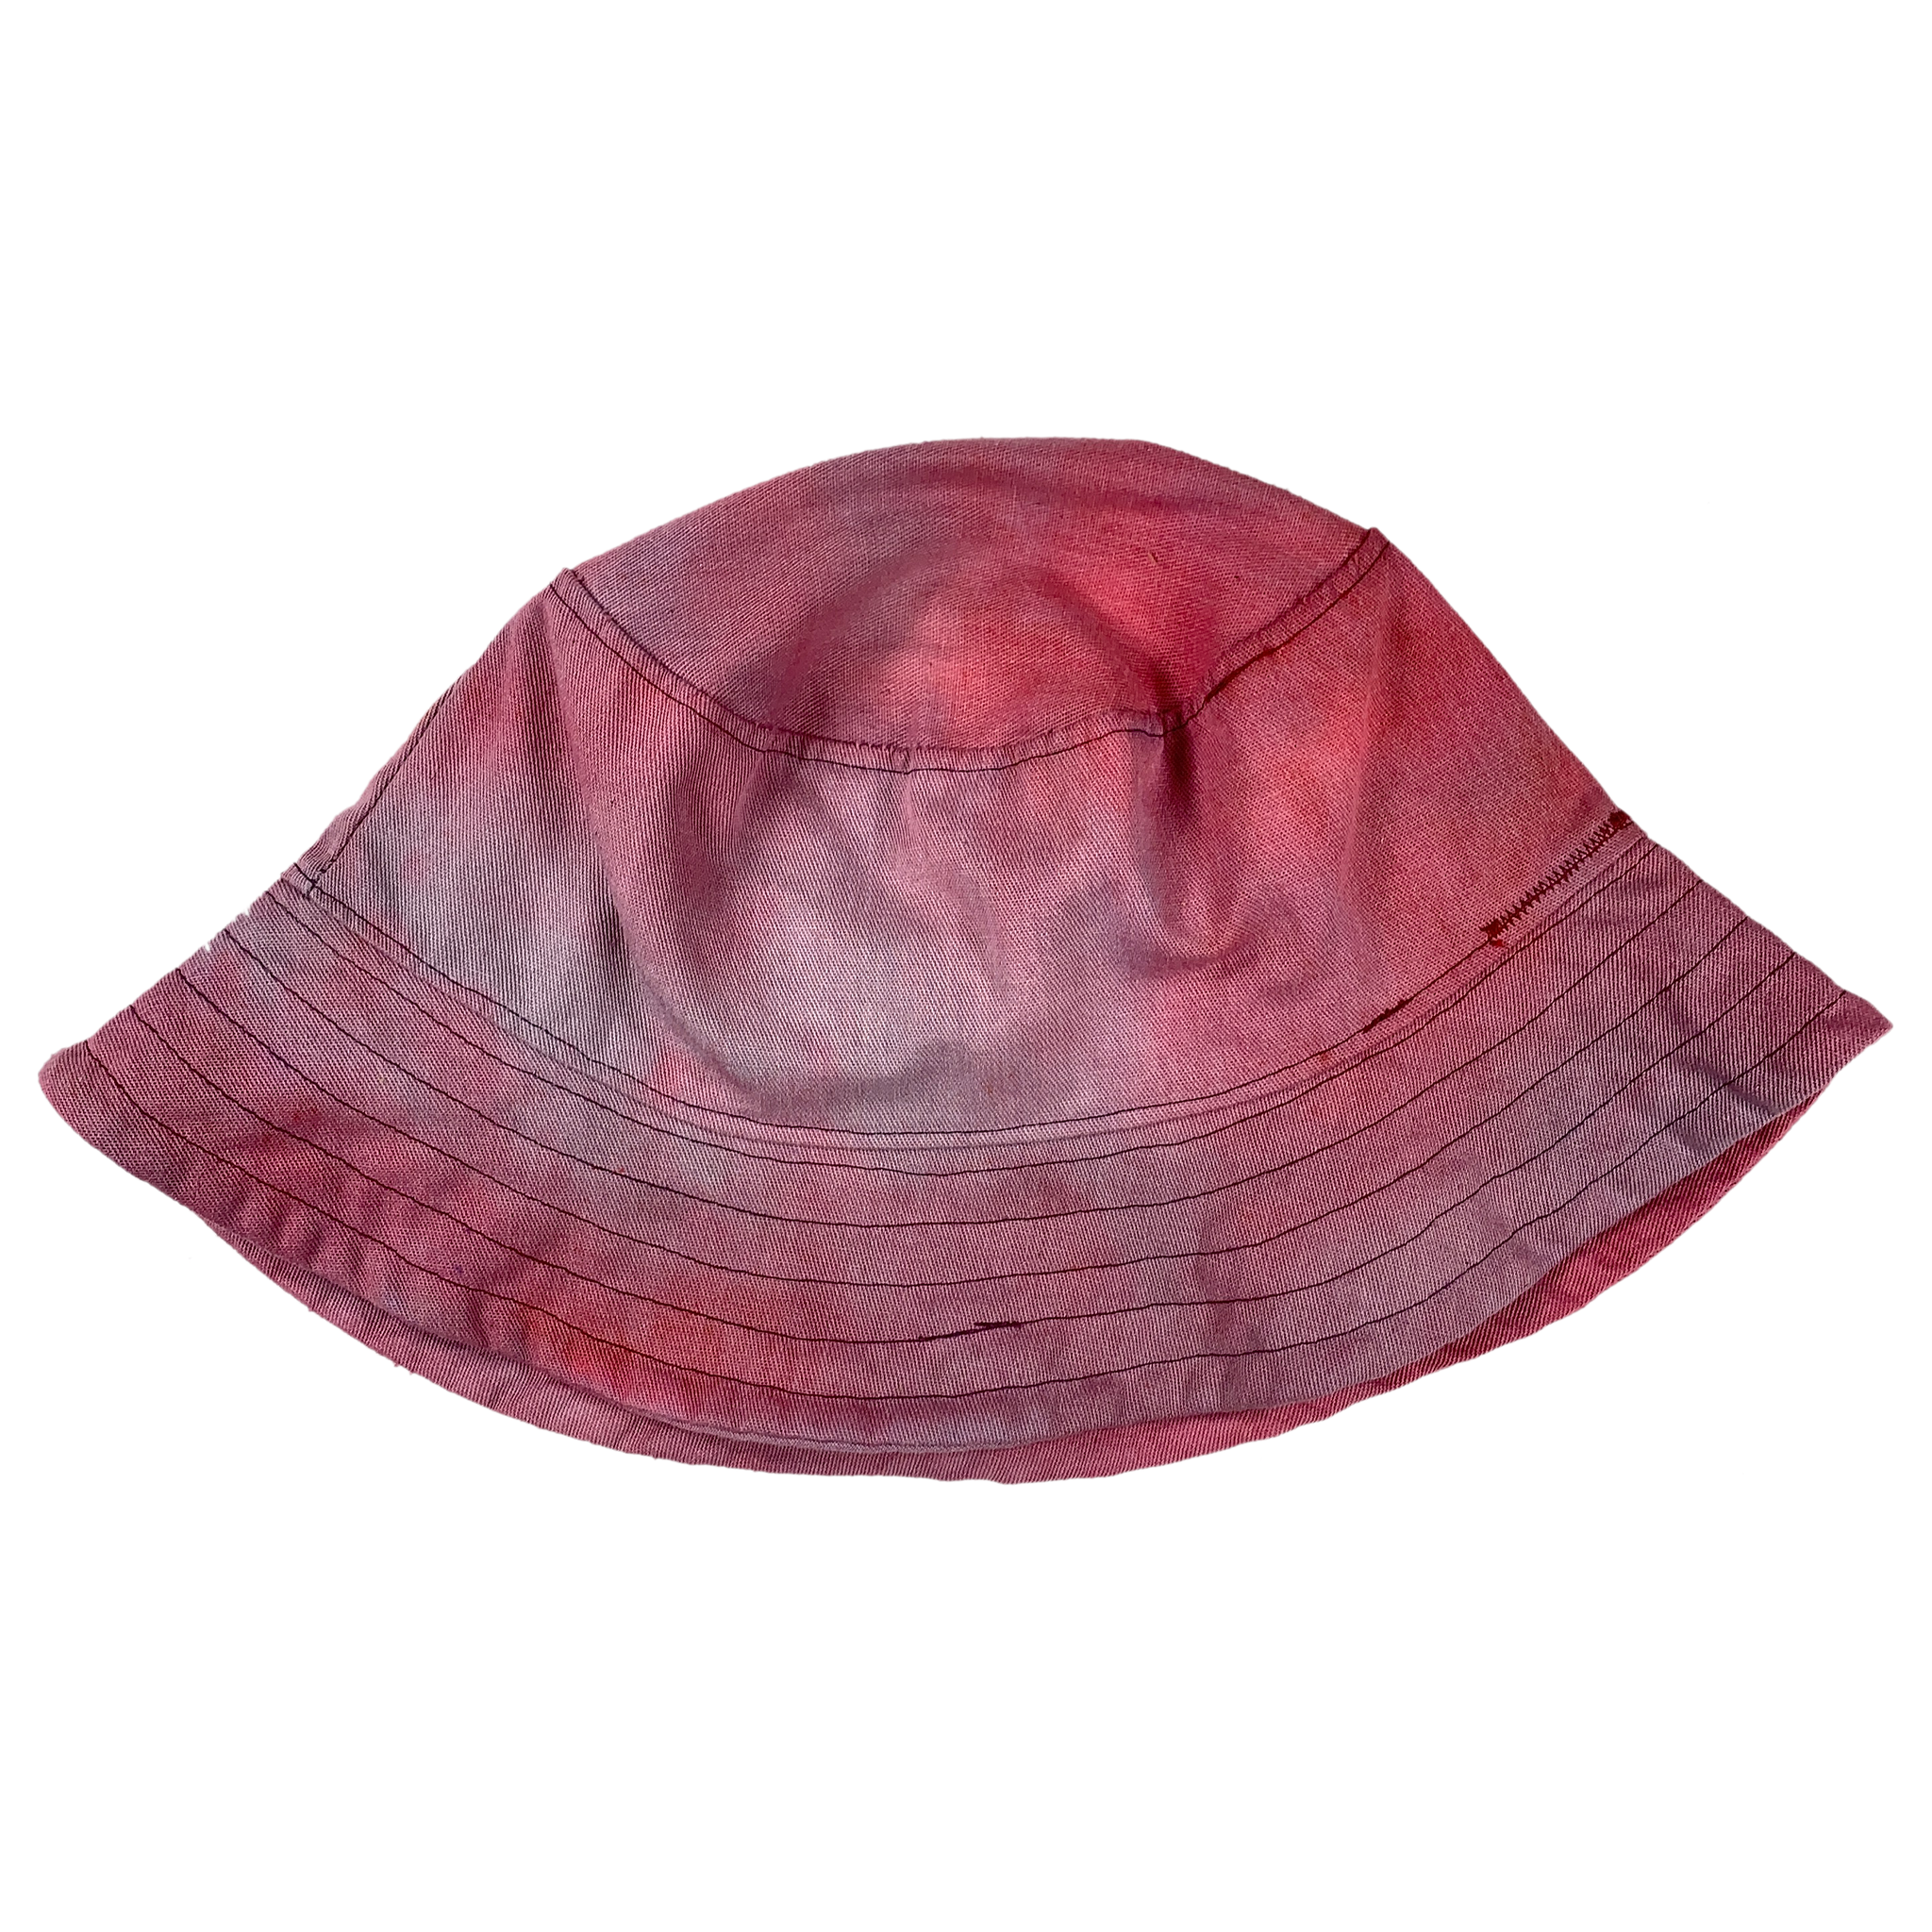 Hand Made and Dyed Bucket Hat - XL/25"